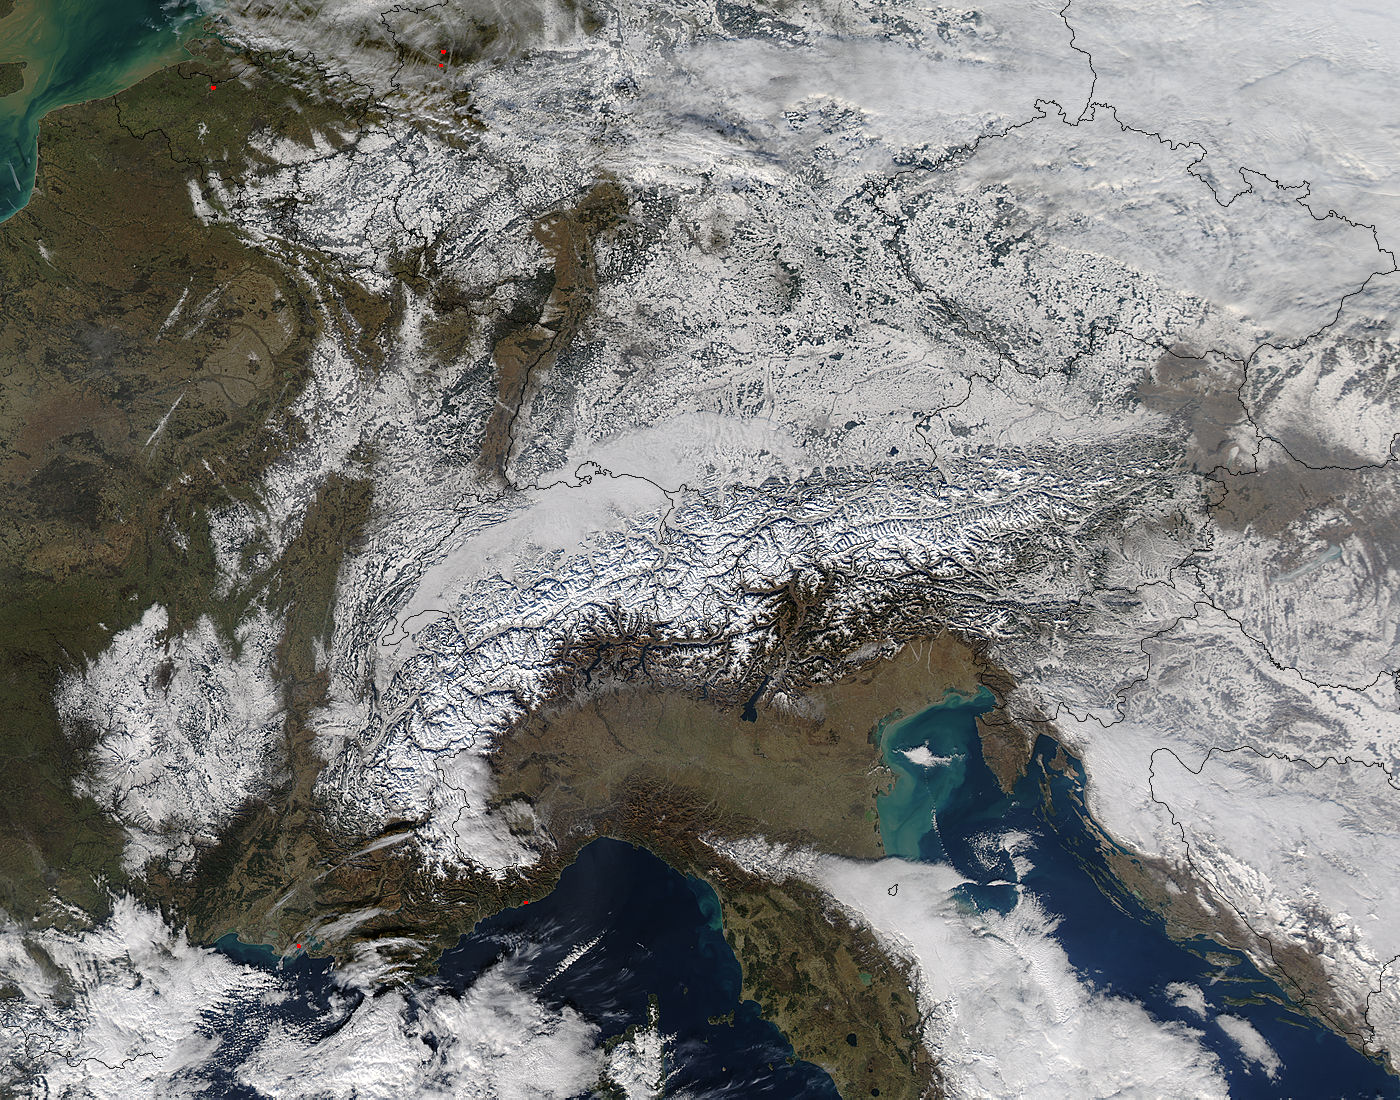 Snow in central Europe